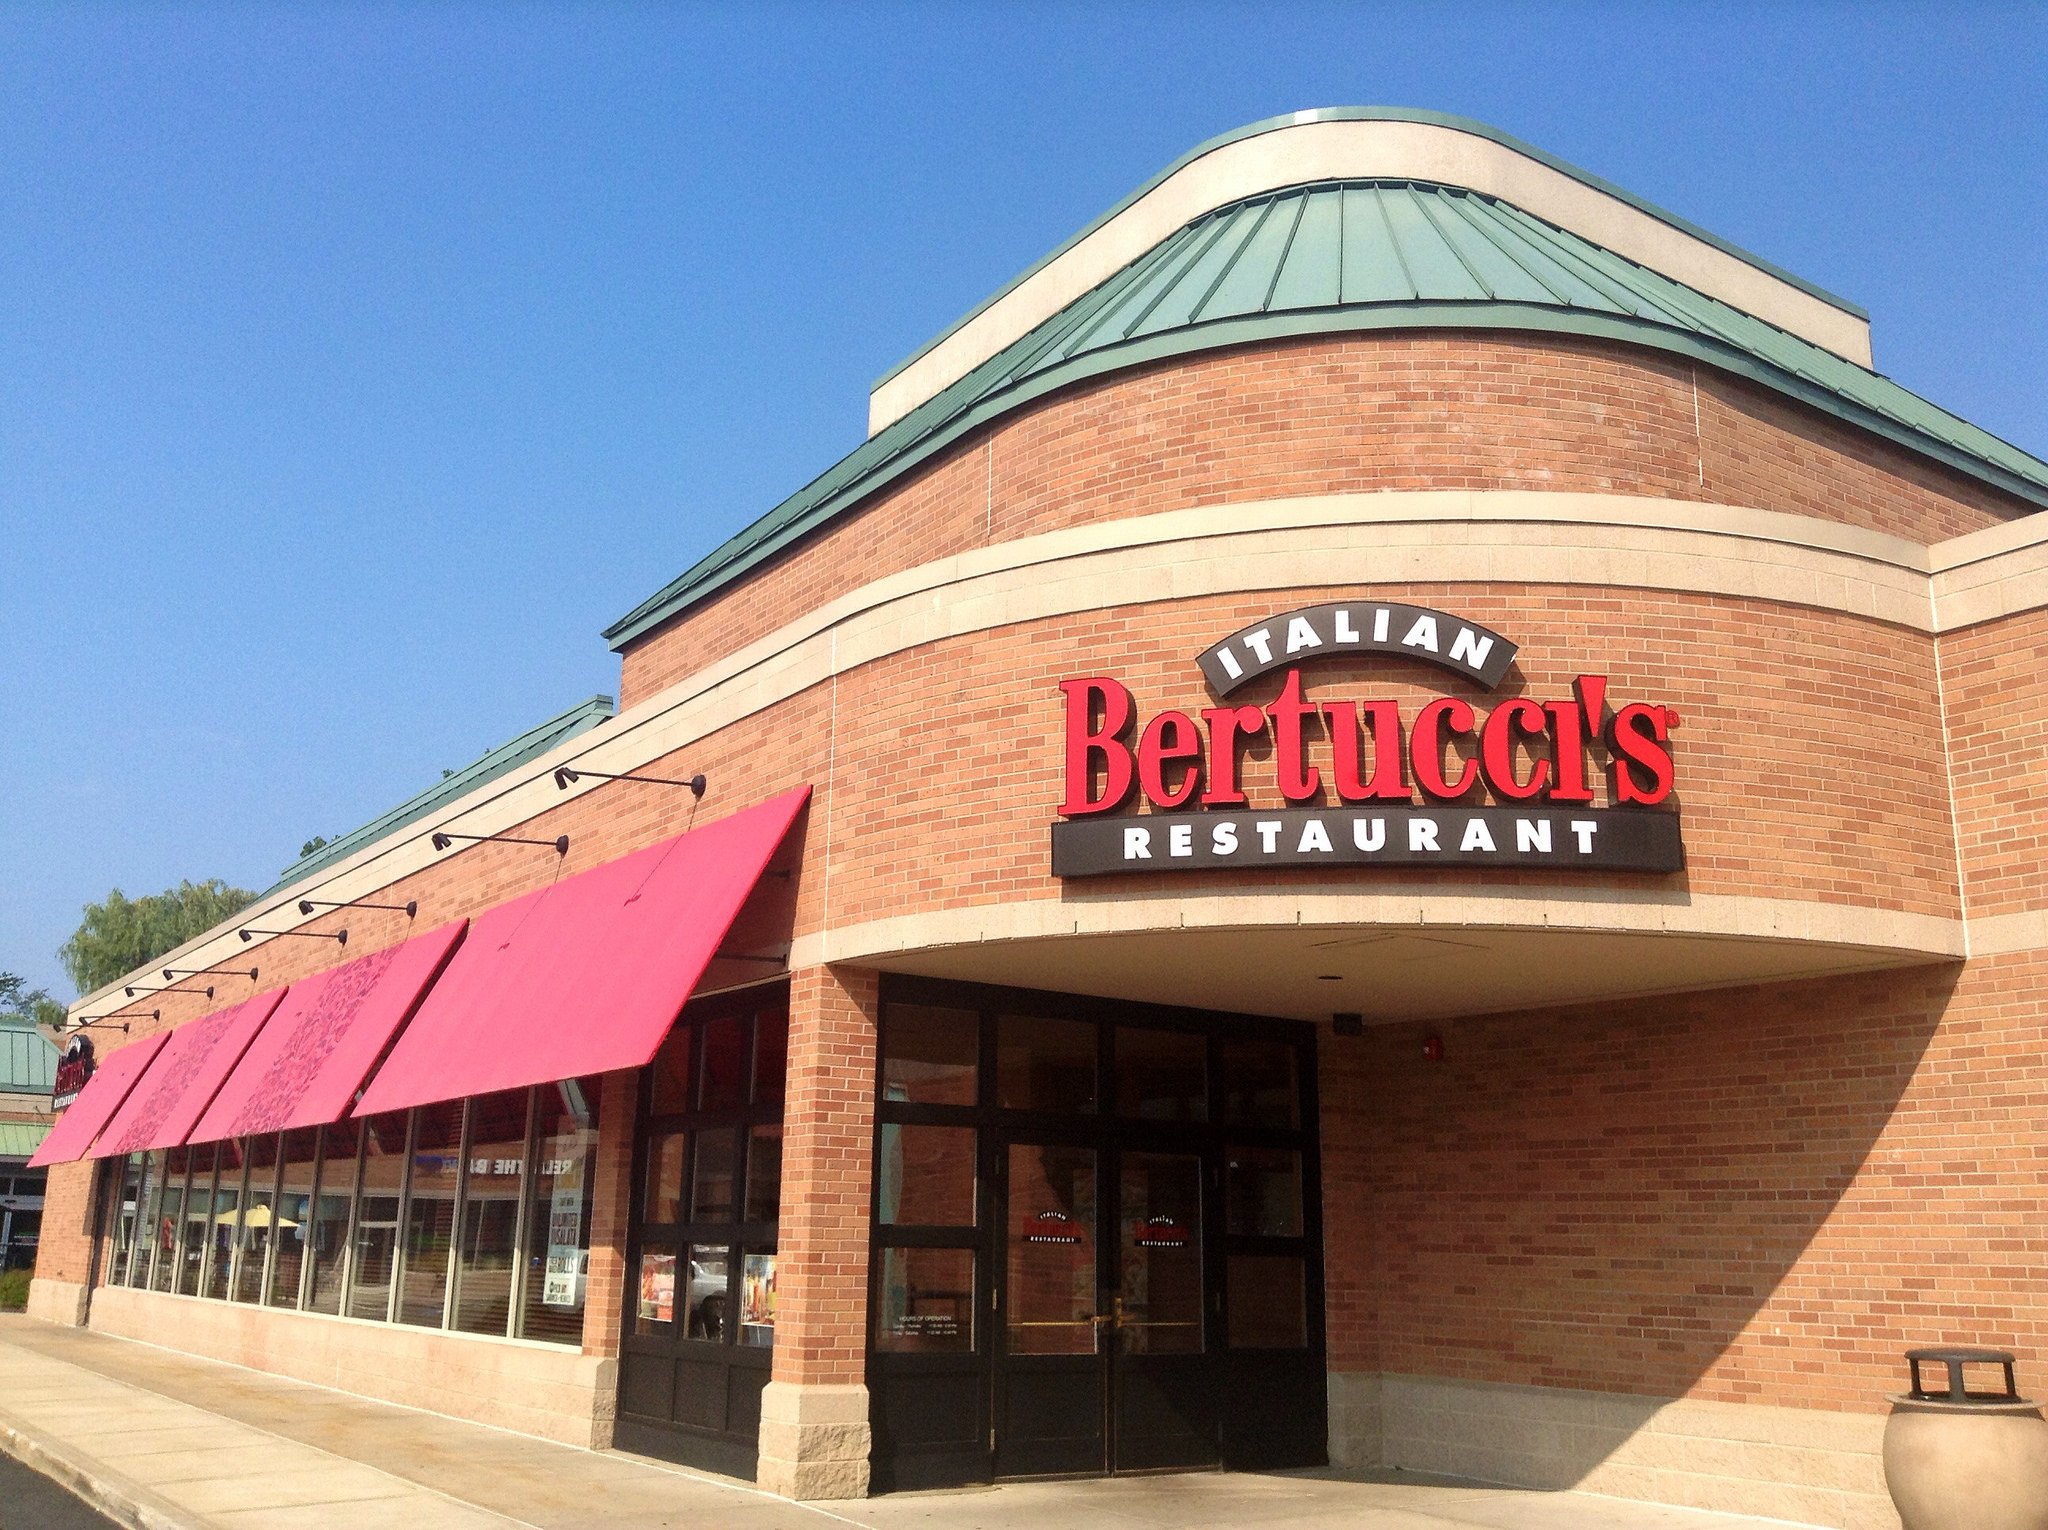 Pizza Chain Bertucci's Is Preparing Bankruptcy Filing - Bloomberg